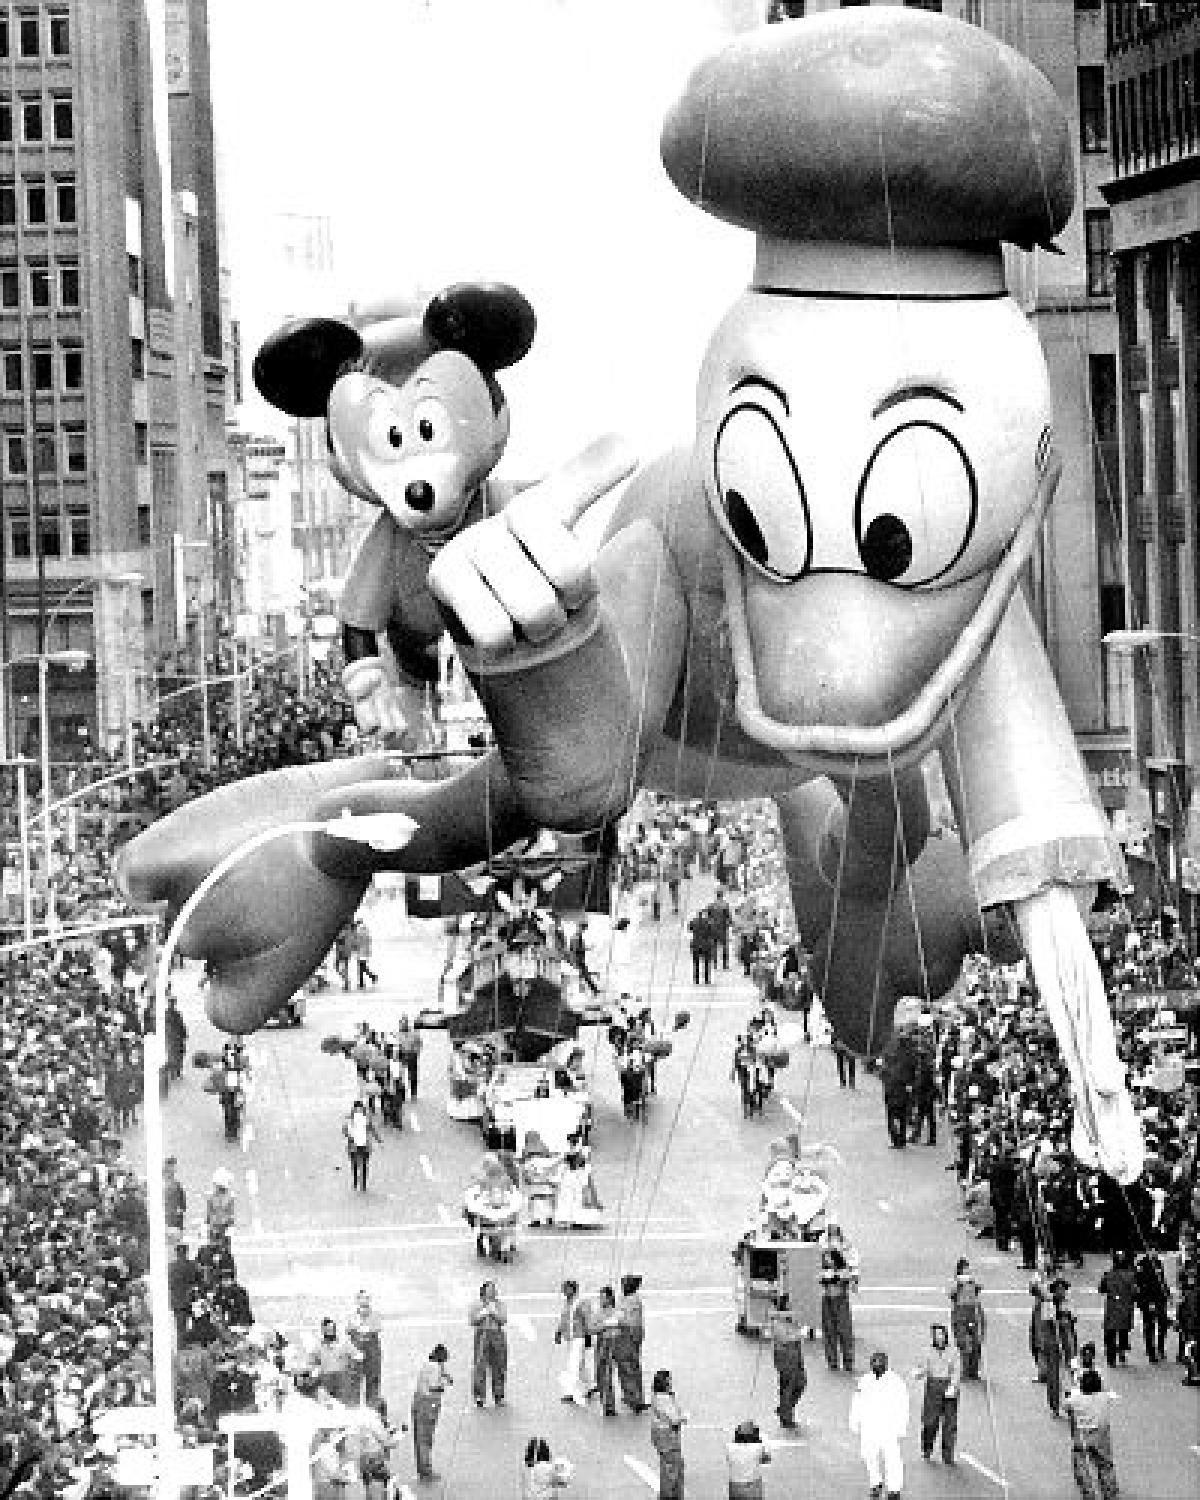 Macy's Thanksgiving Day Parade, 1972's balloons